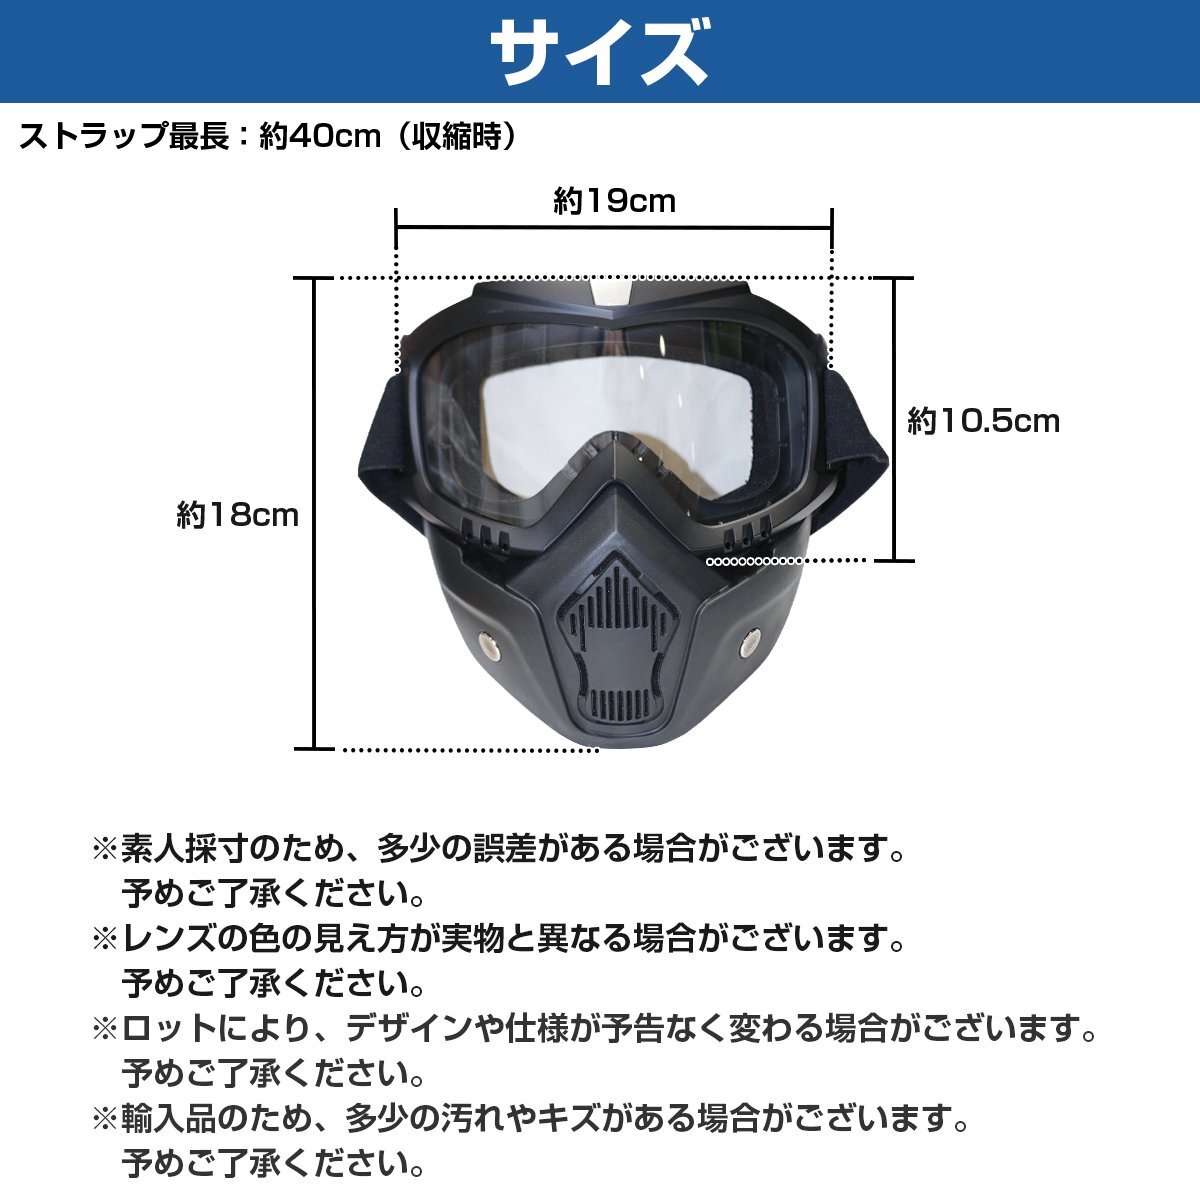  touring . airsoft etc. . large activity! full-face type face mask clear lens transparent bike motorcycle ski snowboard - outdoor 